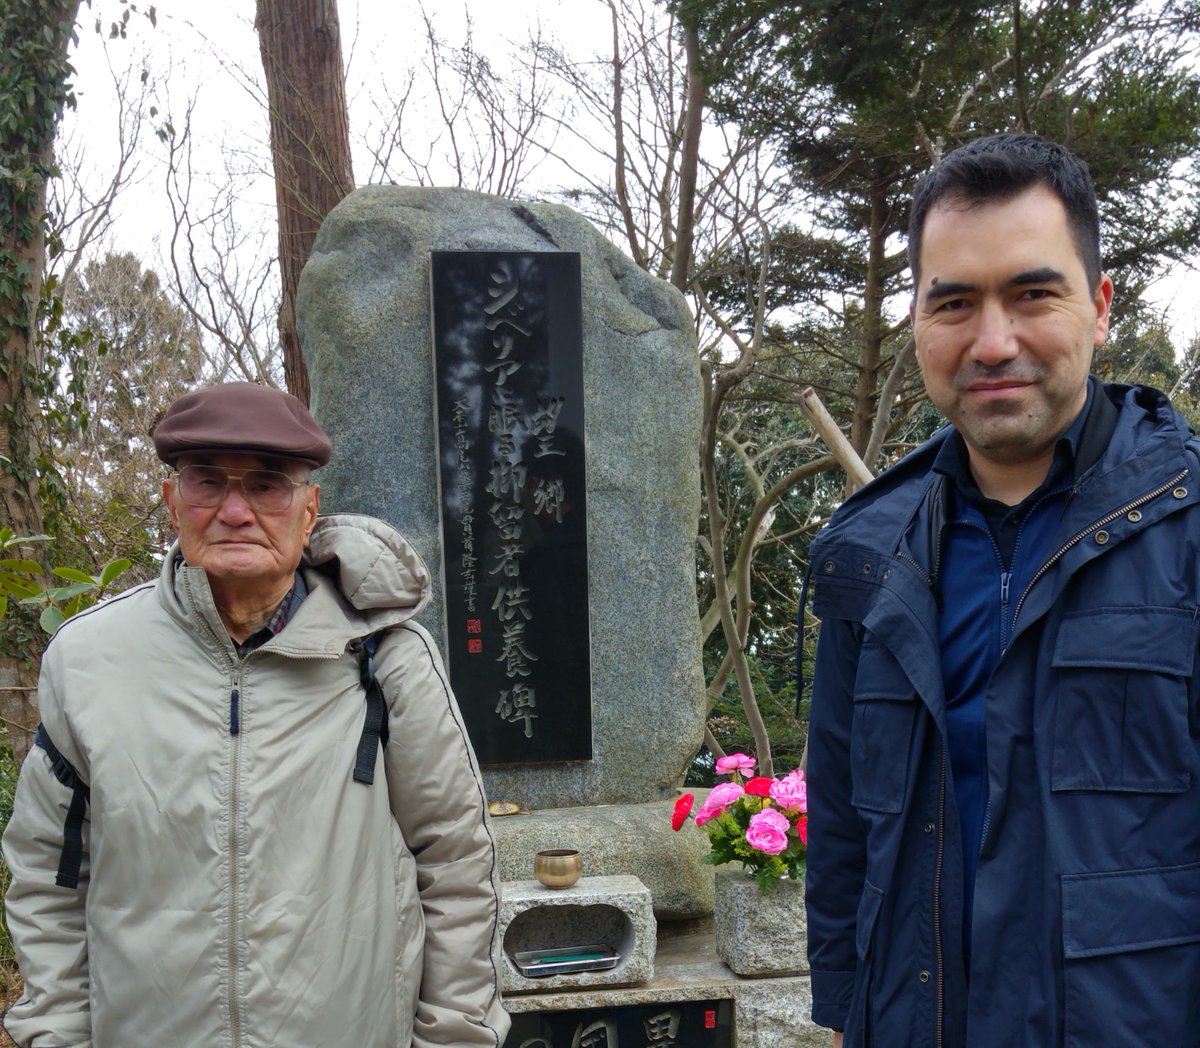 In 2017, I met and interviewed Mr. Satō Kashio, who was also interned in Tayshet. Mr. Satō and a friend erected a monument on top of Mt Takao to all the Japanese POWs who never returned from Siberia. I made this short video about our visit to the monument 